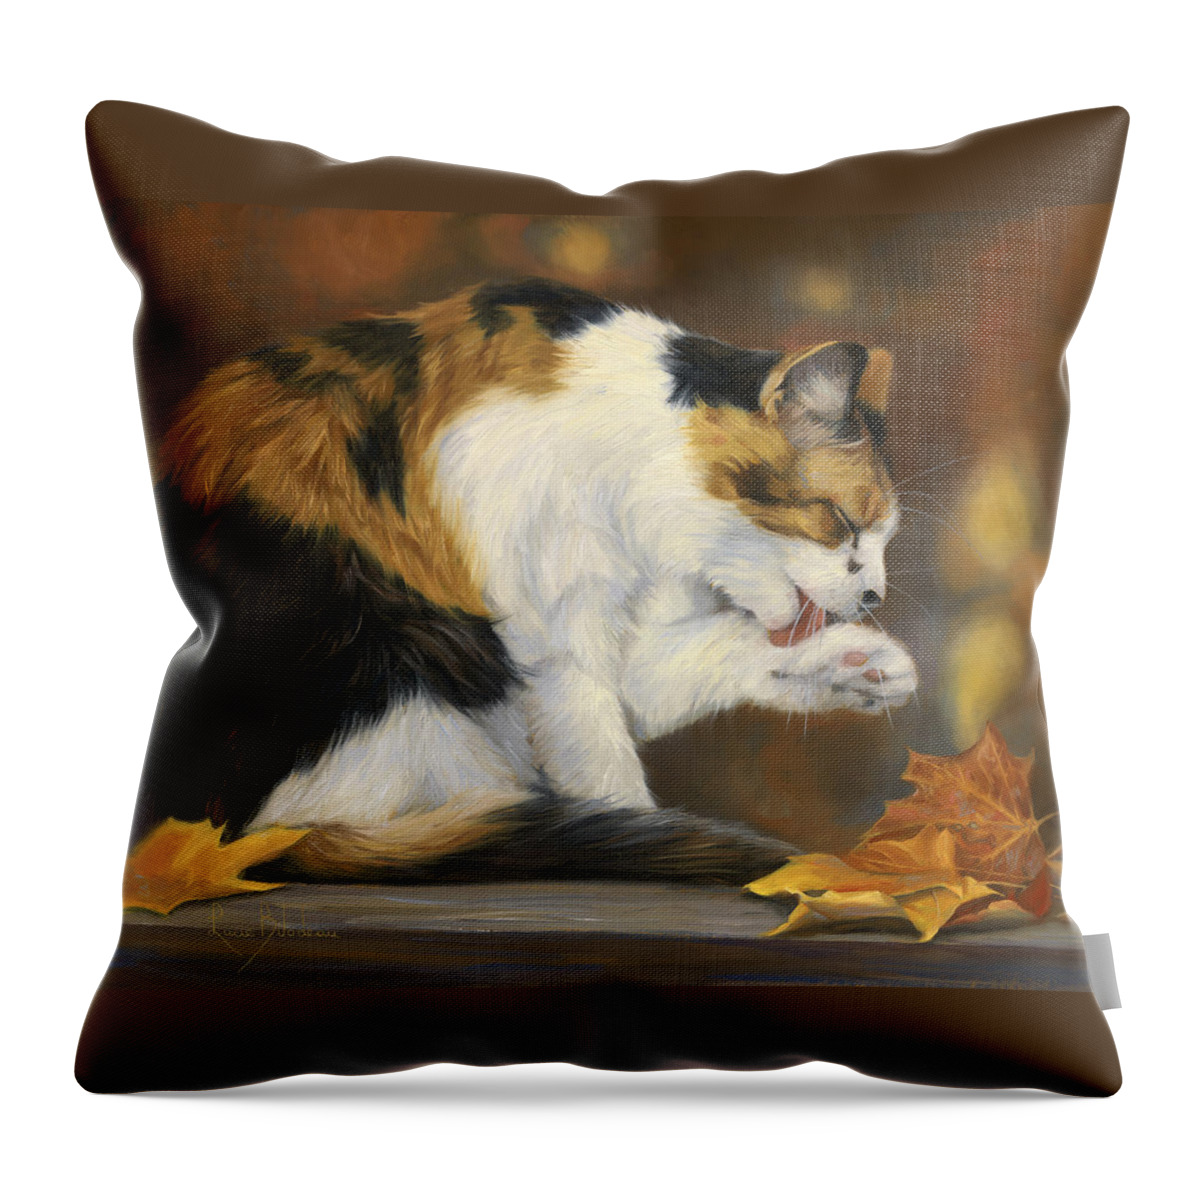 Fall Throw Pillow featuring the painting Getting Pretty by Lucie Bilodeau